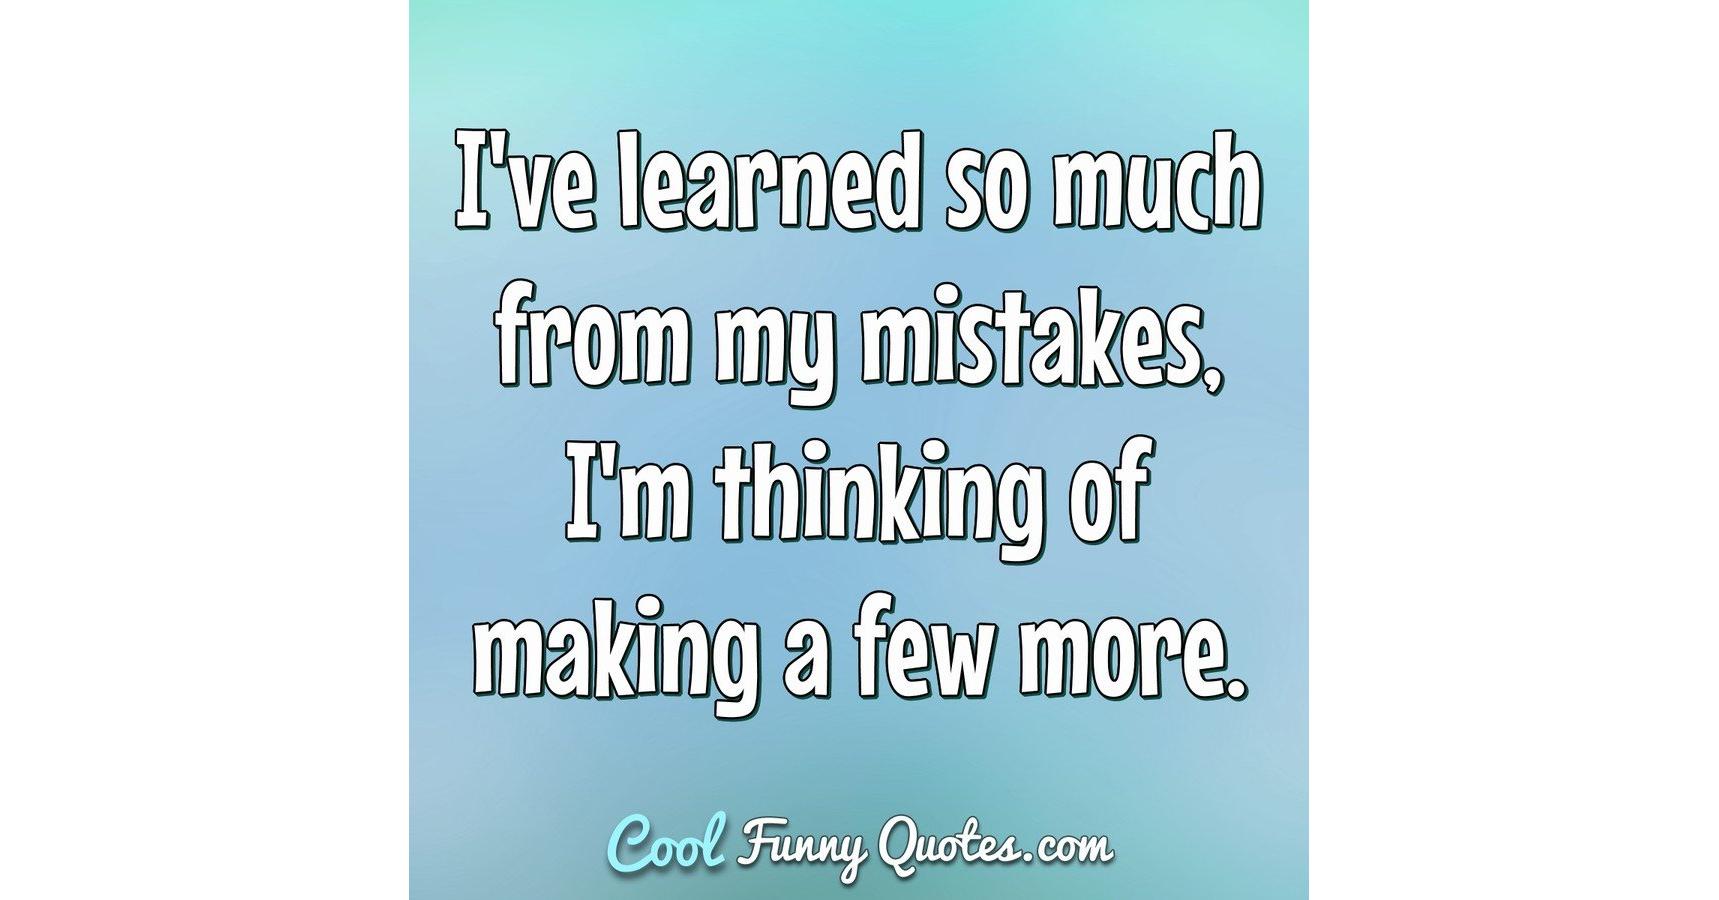 I've learned so much from my mistakes, I'm thinking of making a few more.